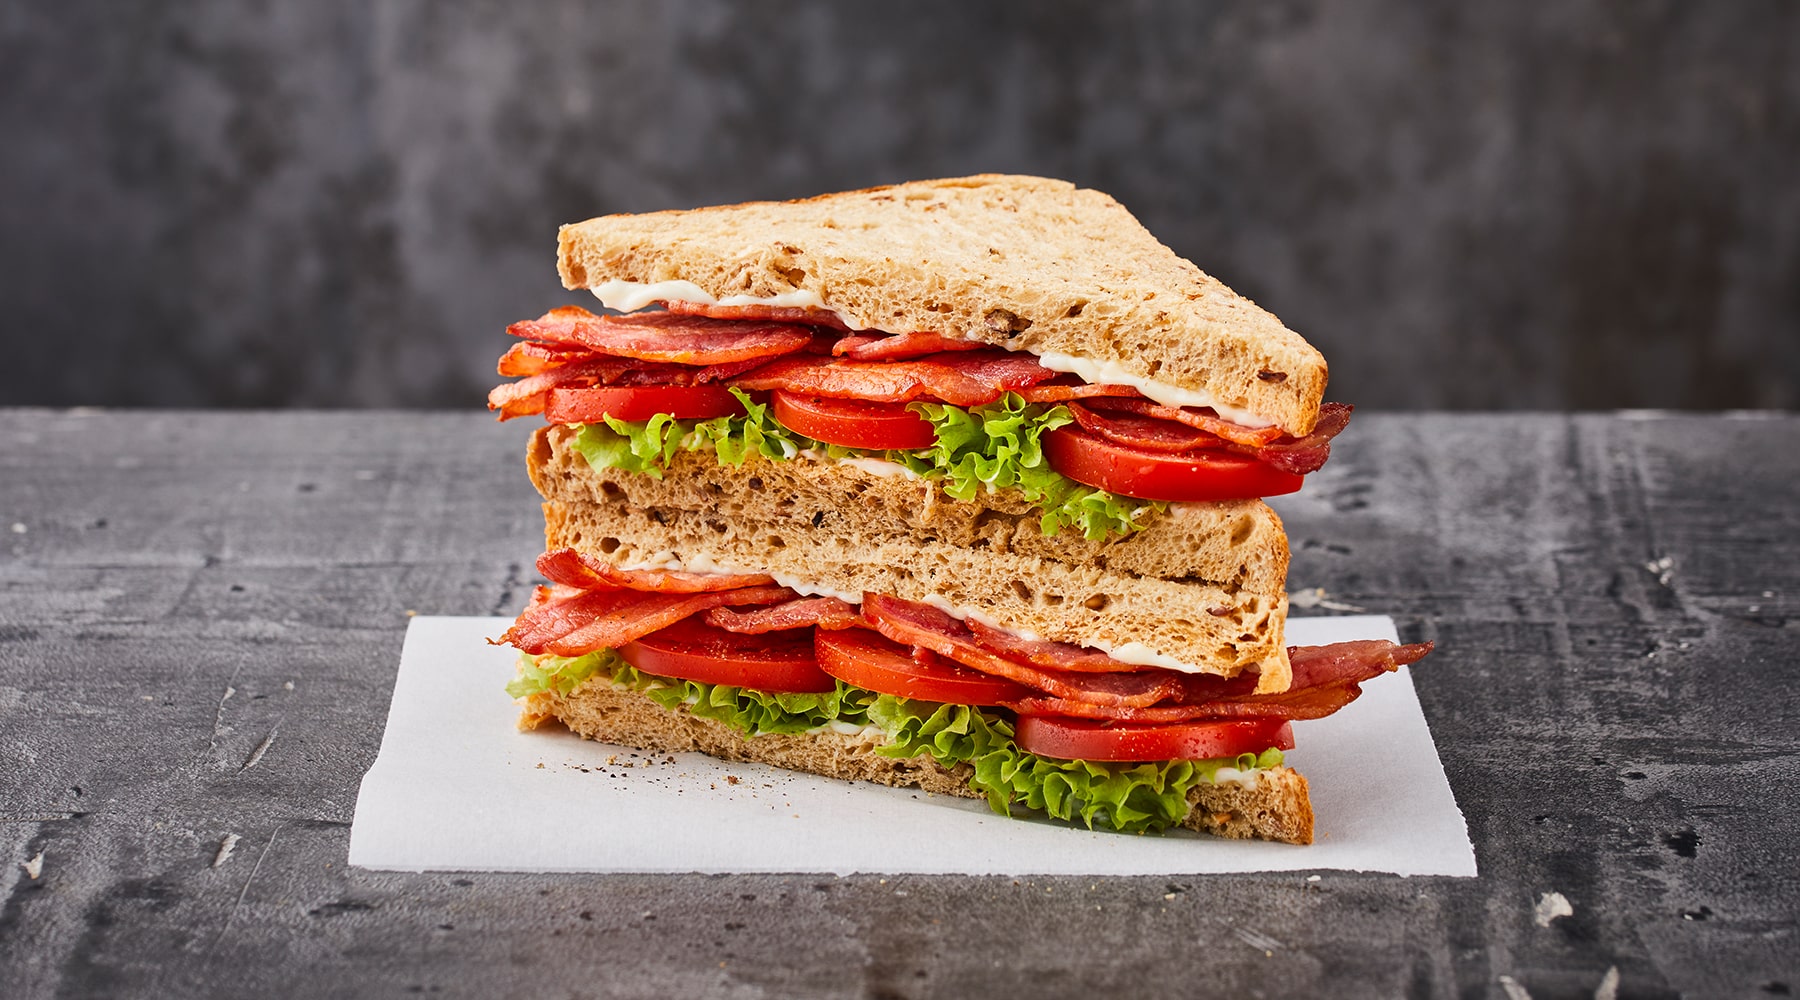 Discover: The BLT